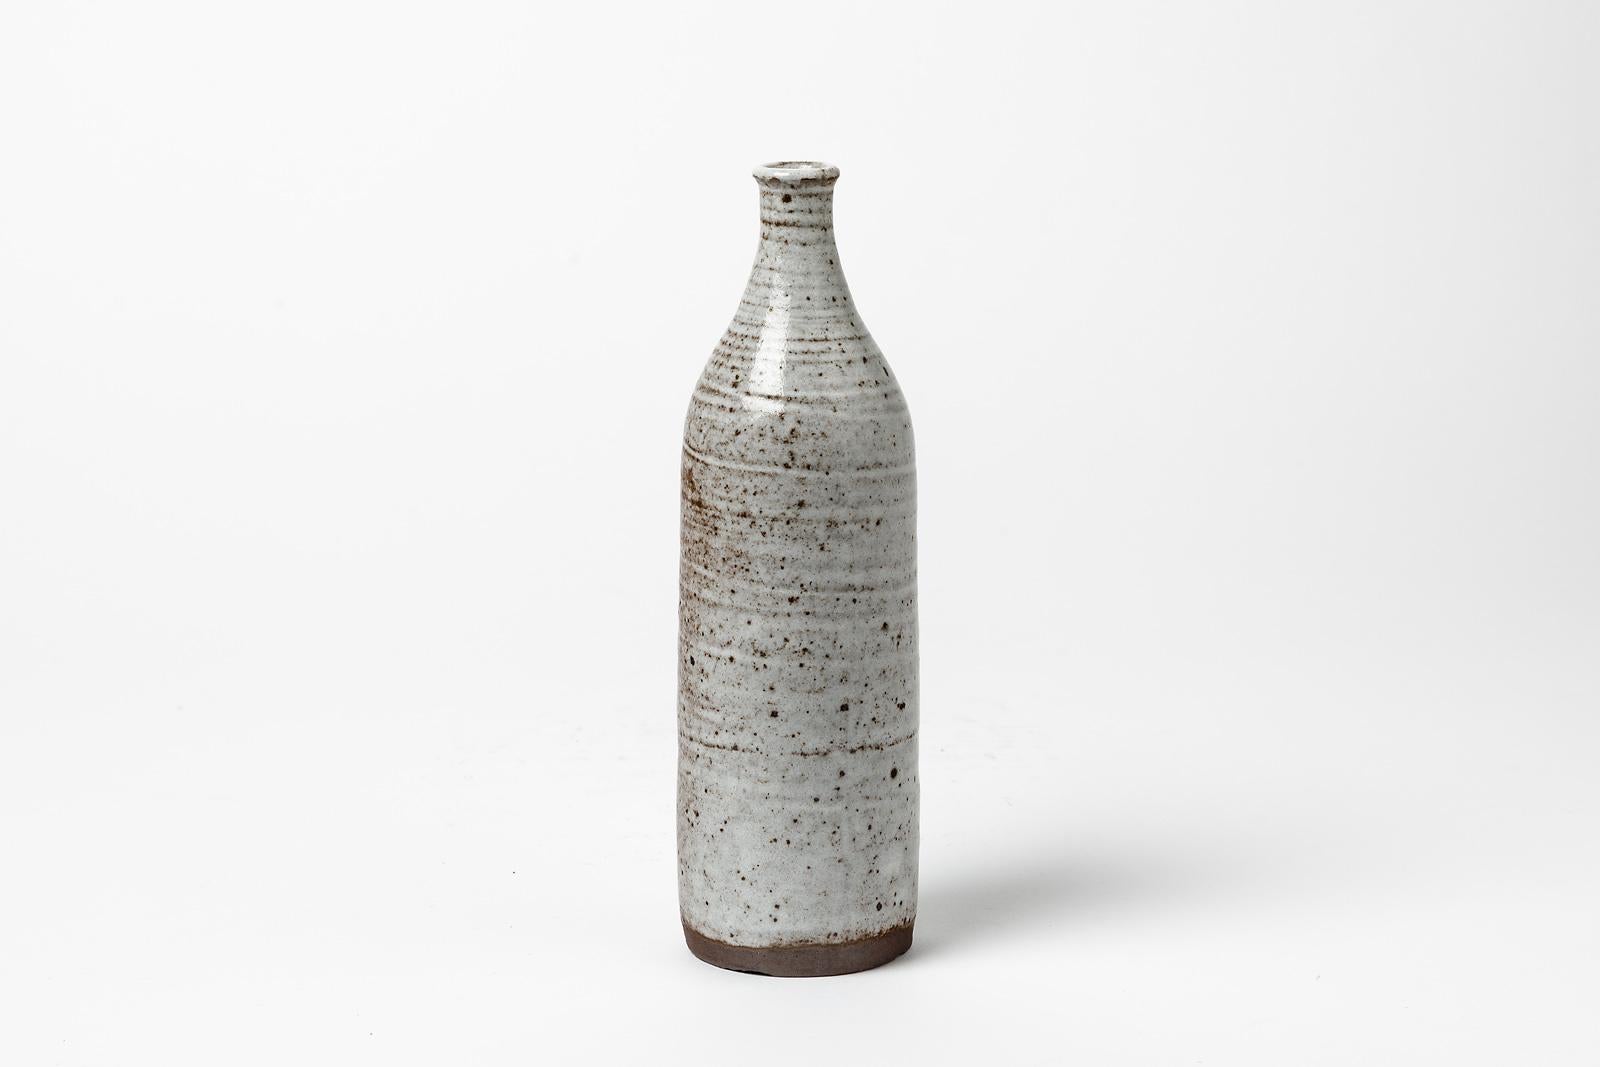 White Stoneware Ceramic Bottle Vase by Pol Chambost in Ratilly 1976 Design In Excellent Condition For Sale In Neuilly-en- sancerre, FR